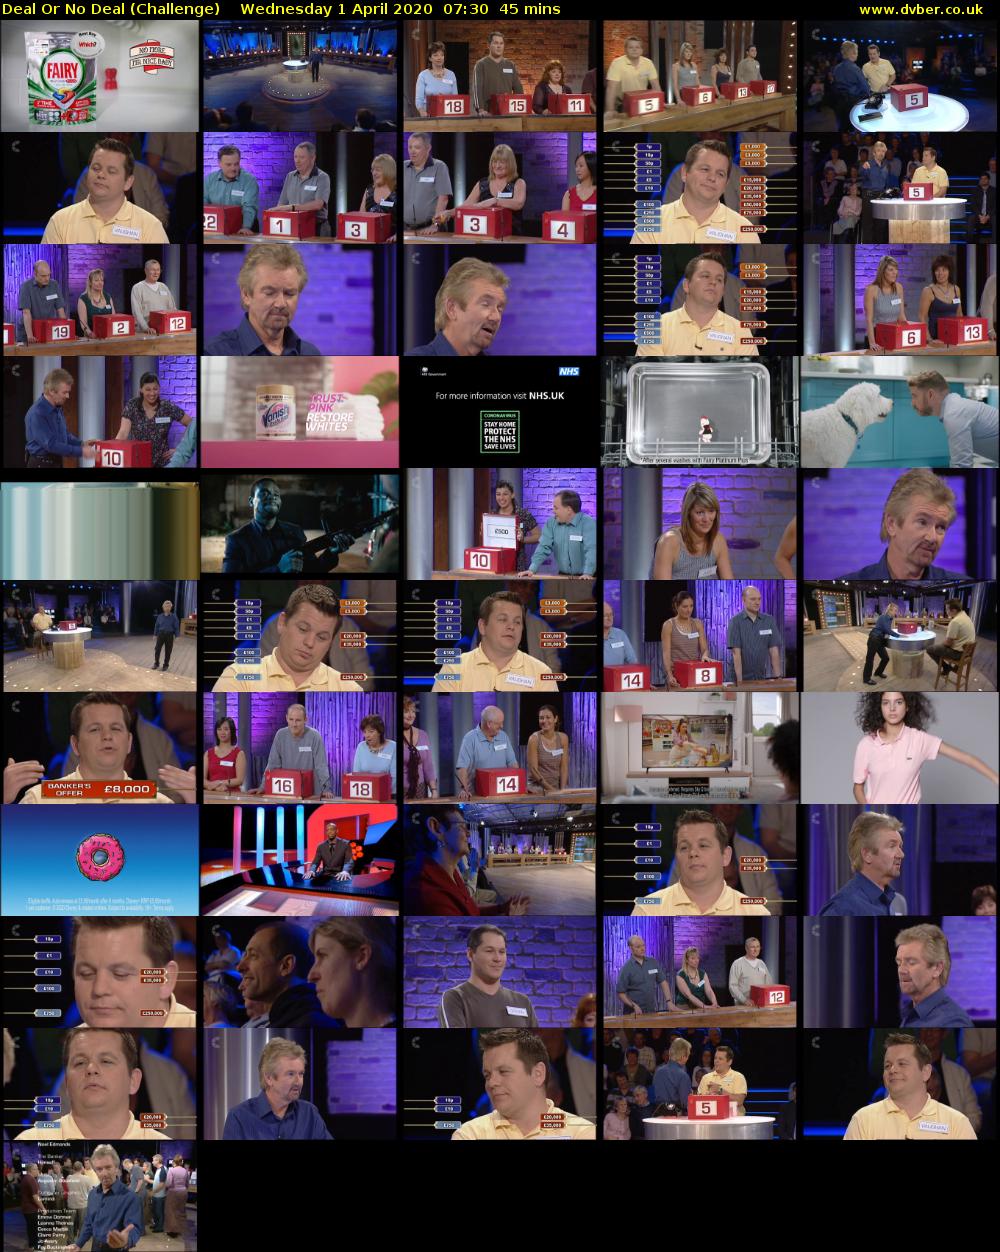 Deal Or No Deal (Challenge) Wednesday 1 April 2020 07:30 - 08:15